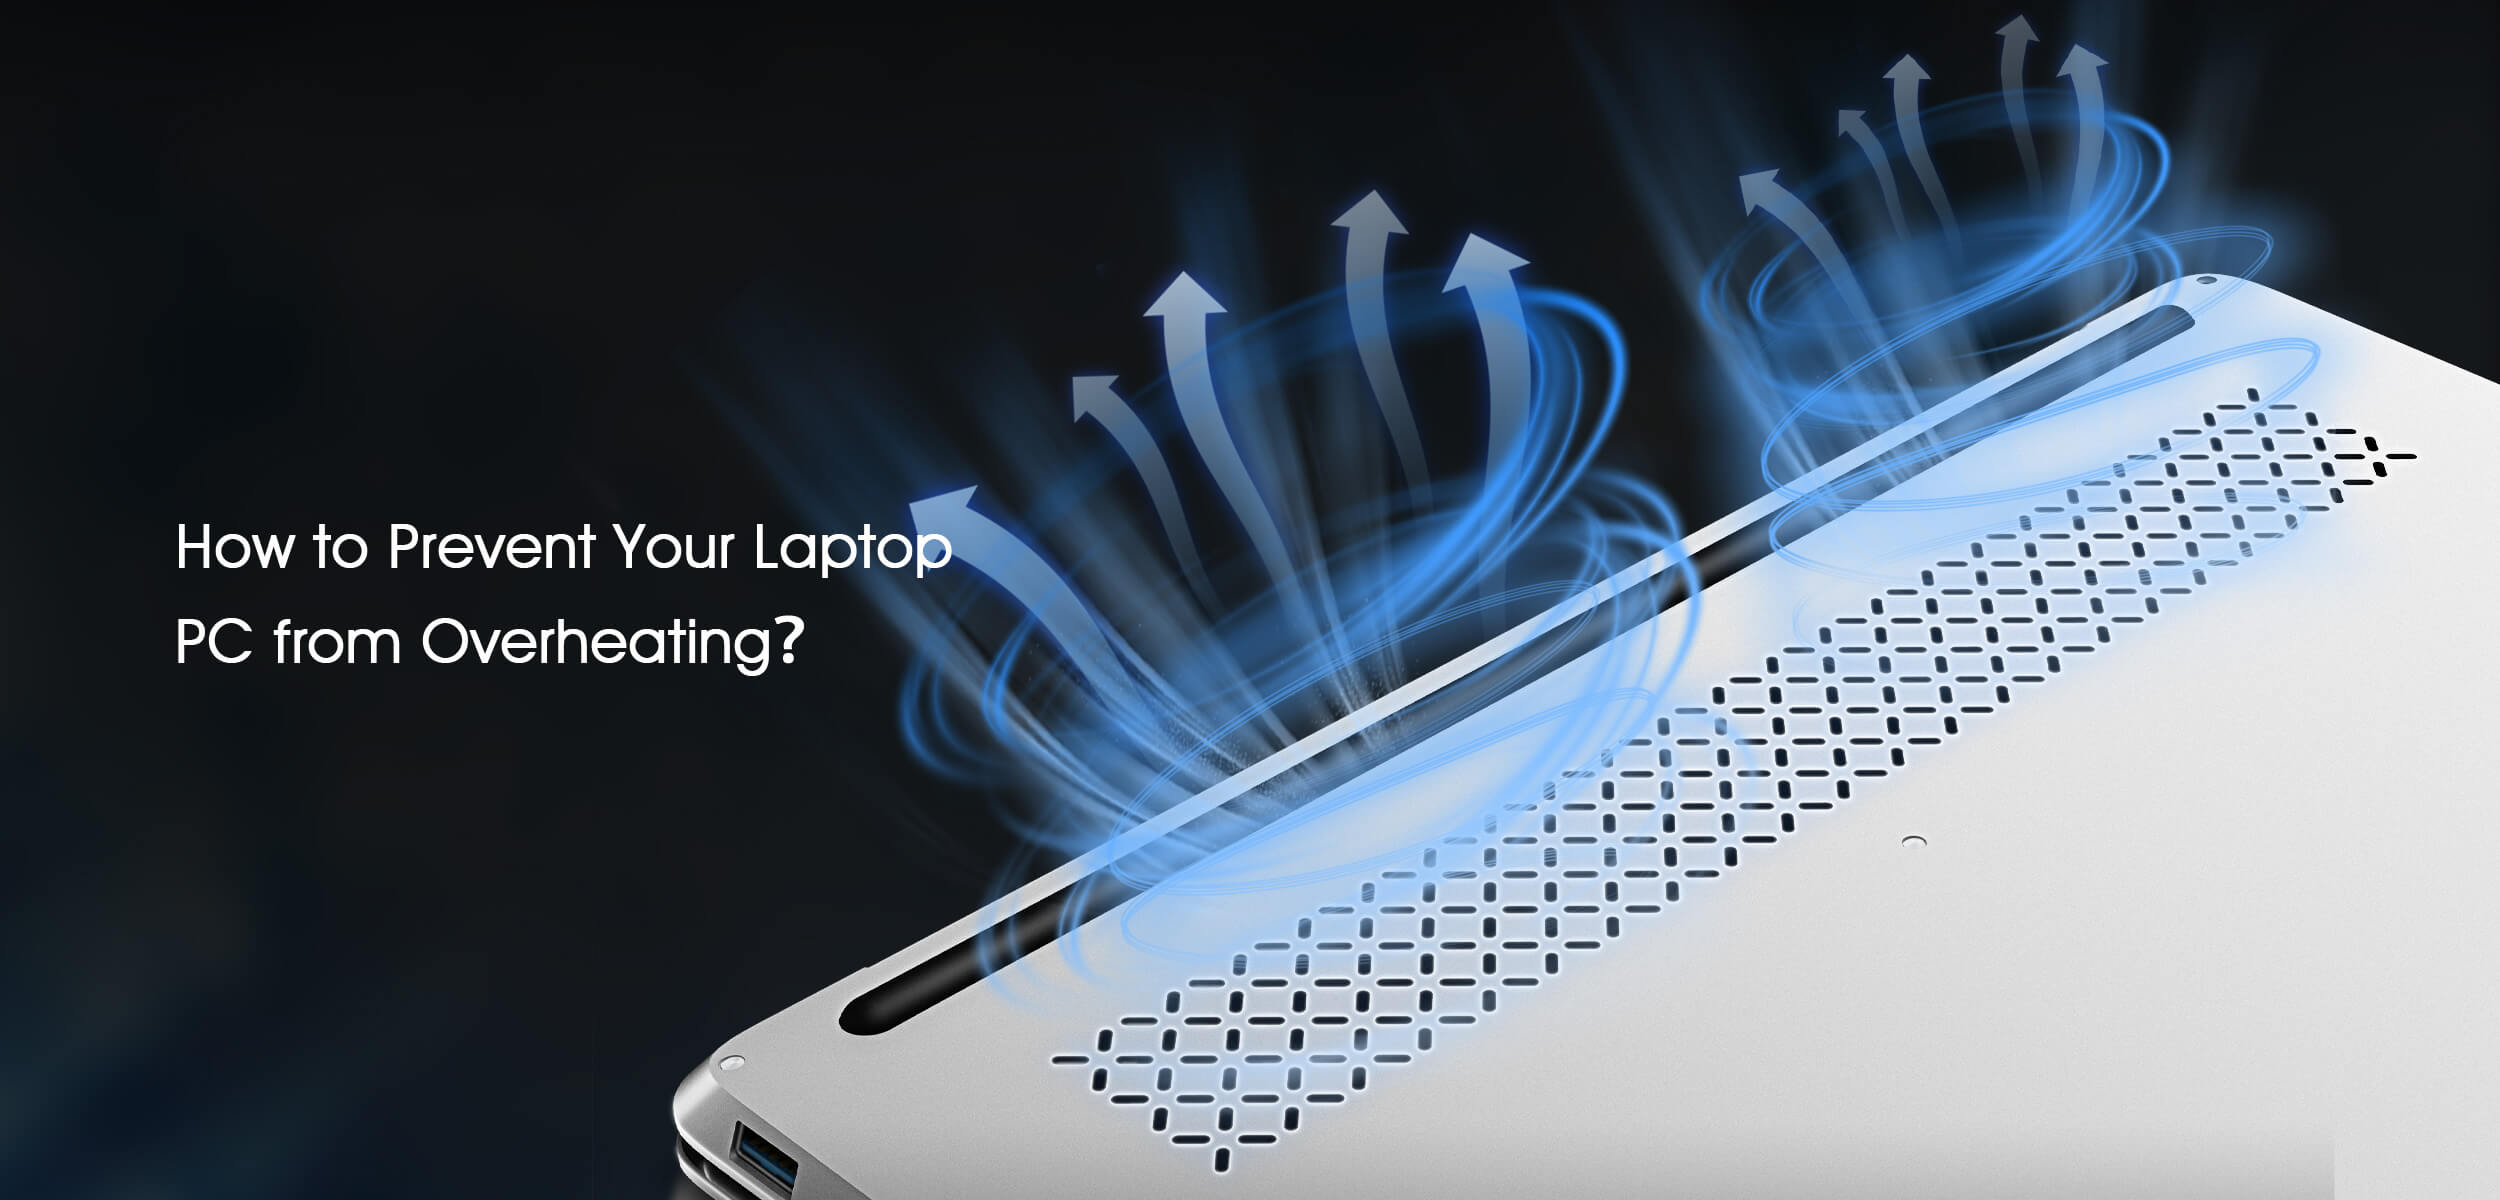 How to Prevent Your Laptop PC from Overheating